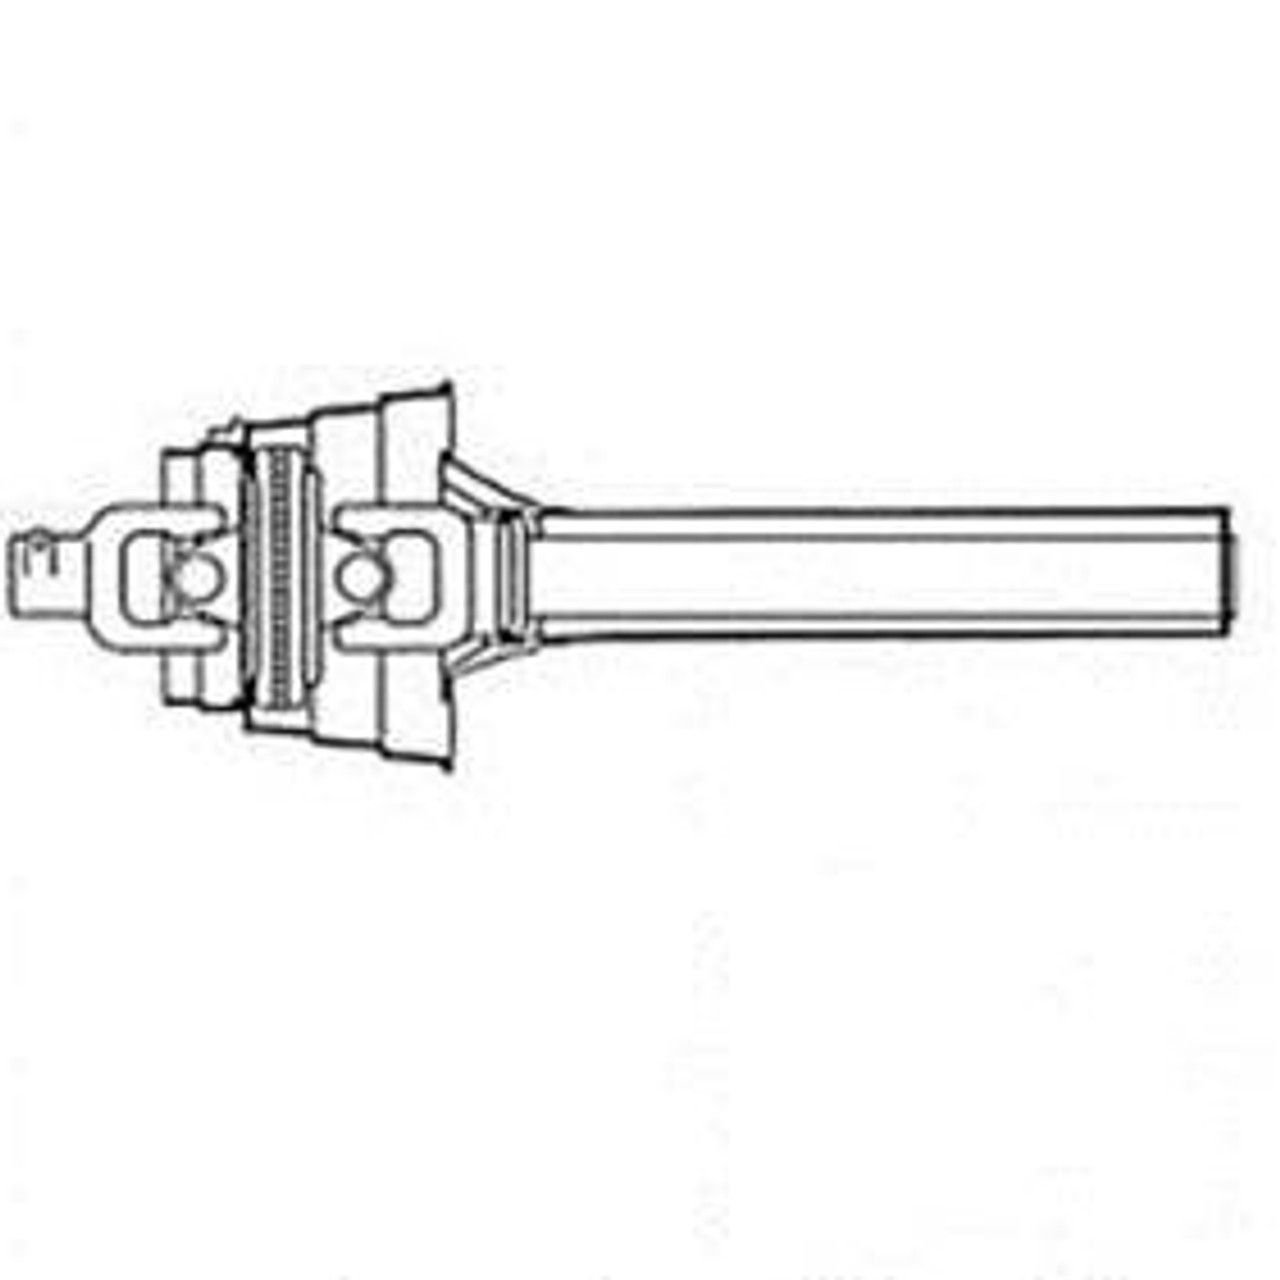 Series 2580 Driveline Assembly 55"-59"